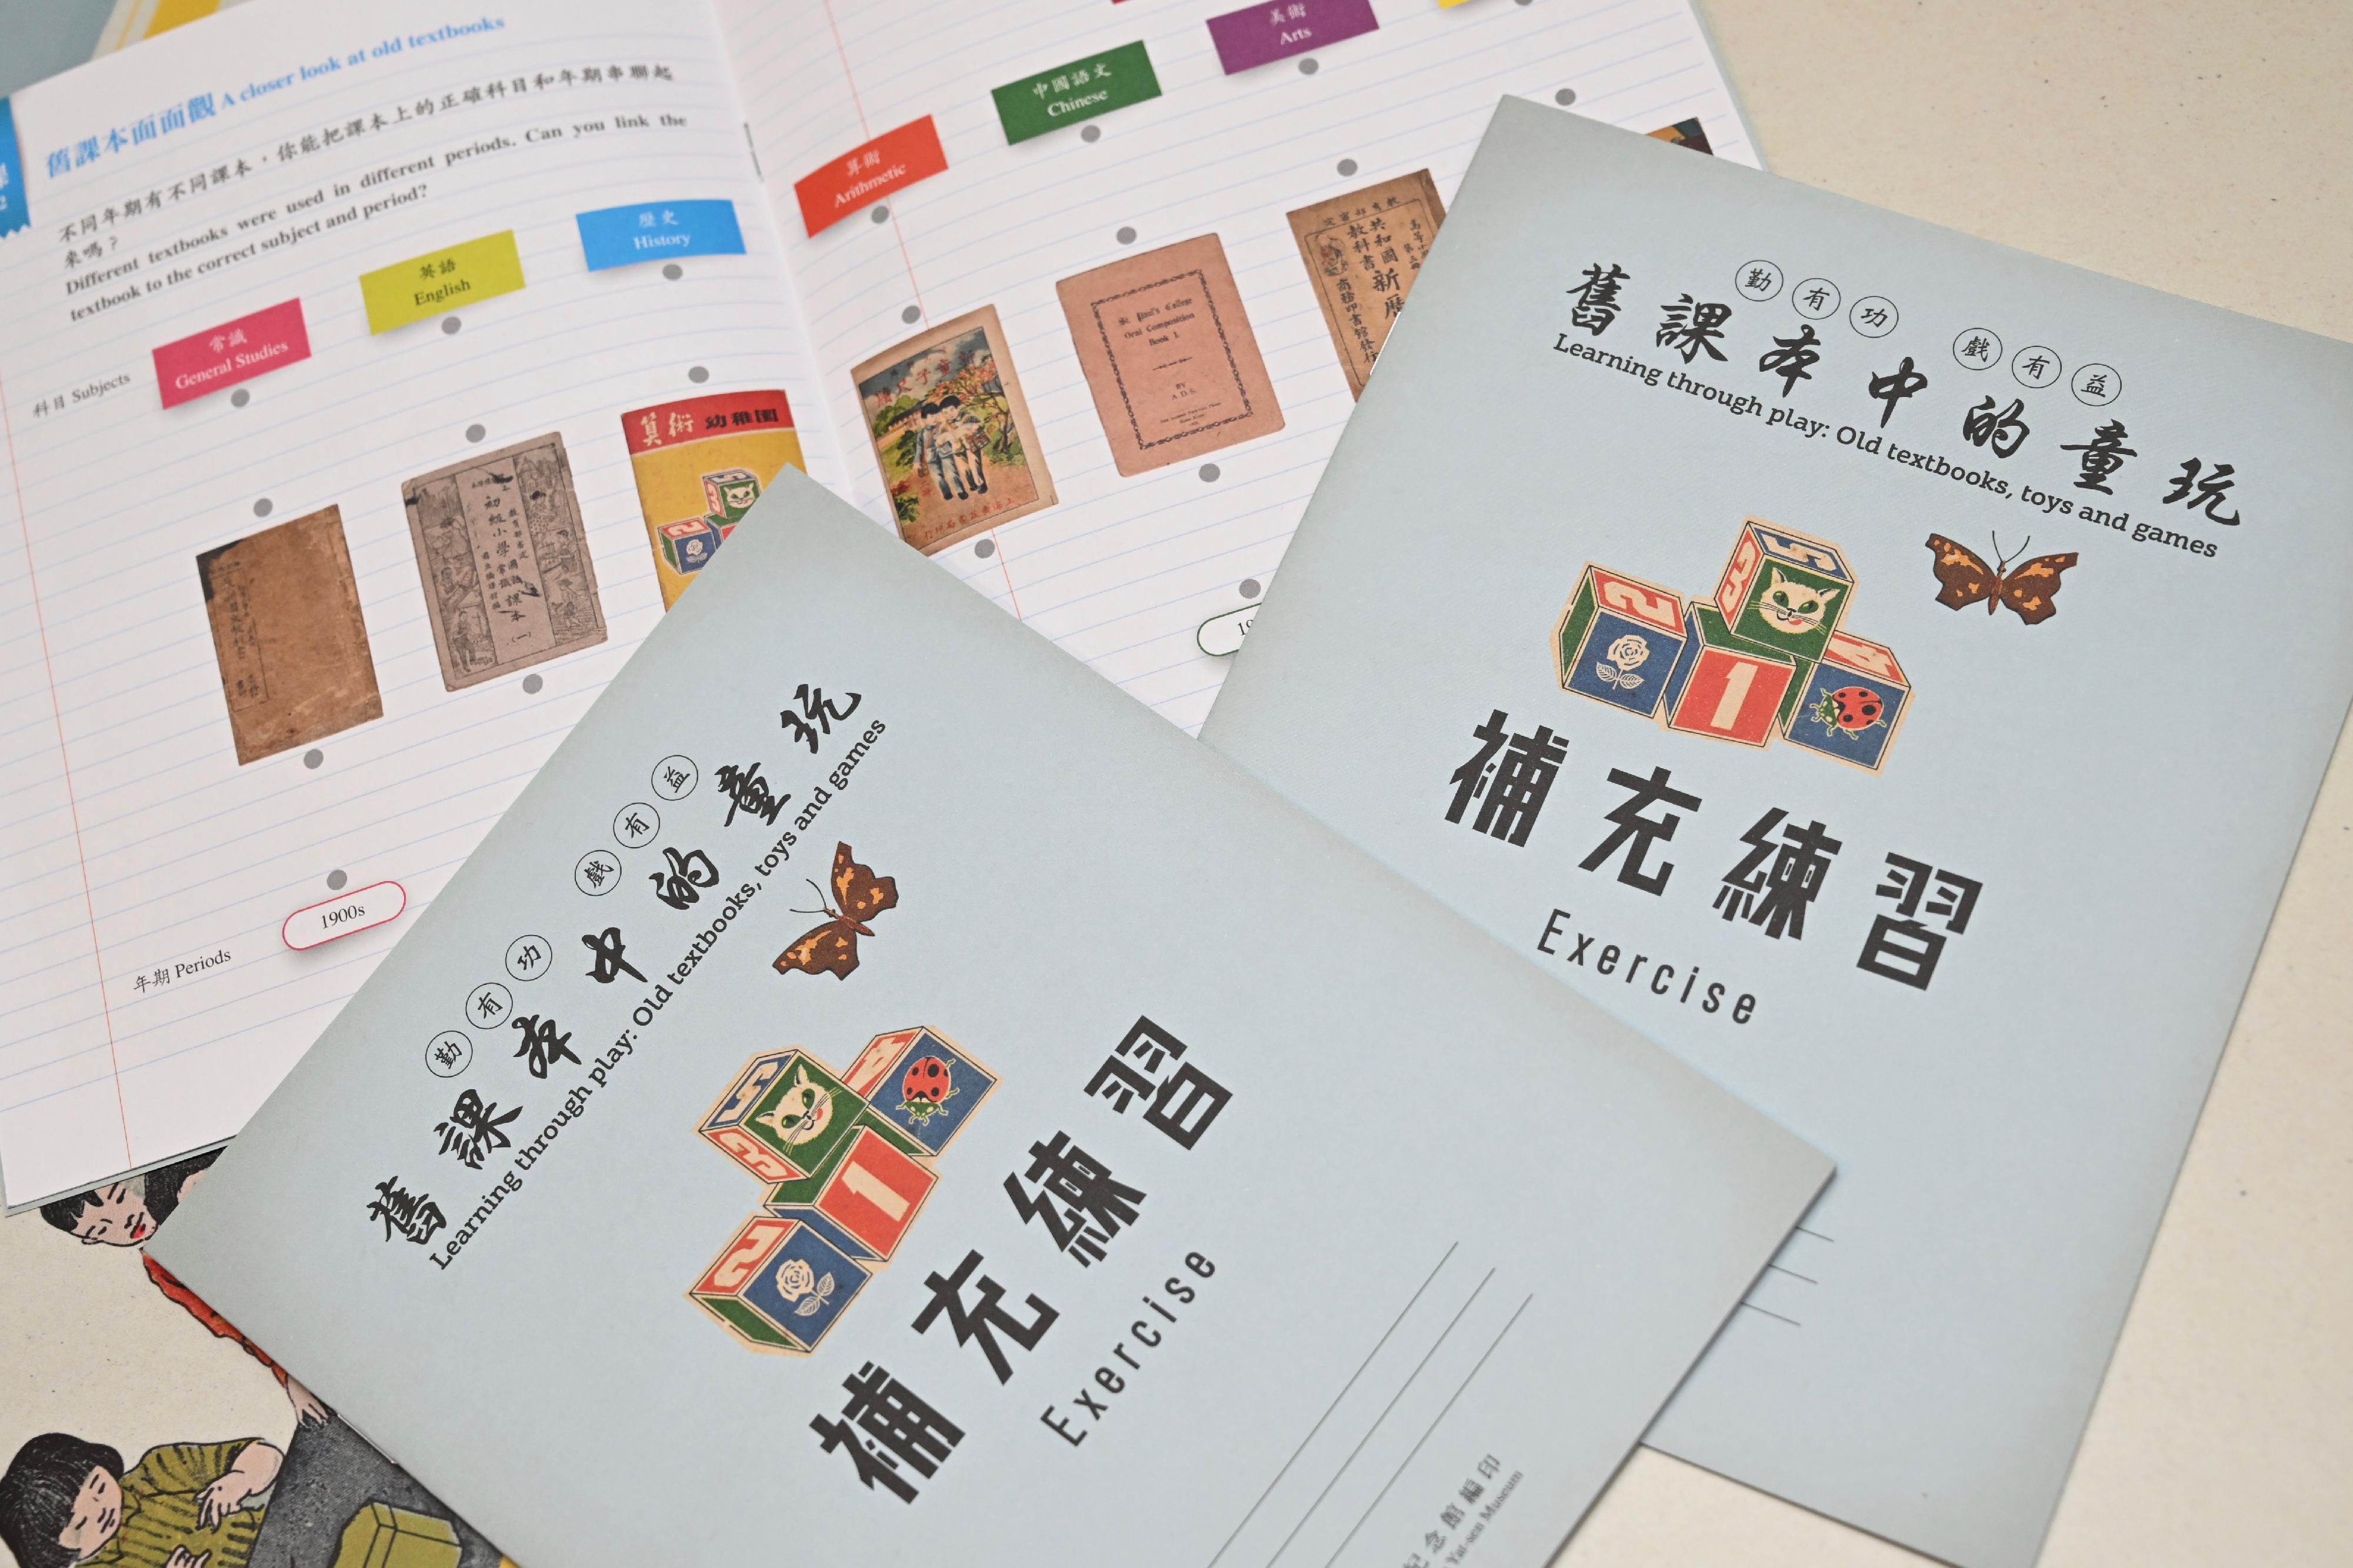 The Dr Sun Yat-sen Museum will launch a new special exhibition, "Learning through play: Old textbooks, toys and games", tomorrow (December 22). Photo shows the education worksheets at the exhibition.